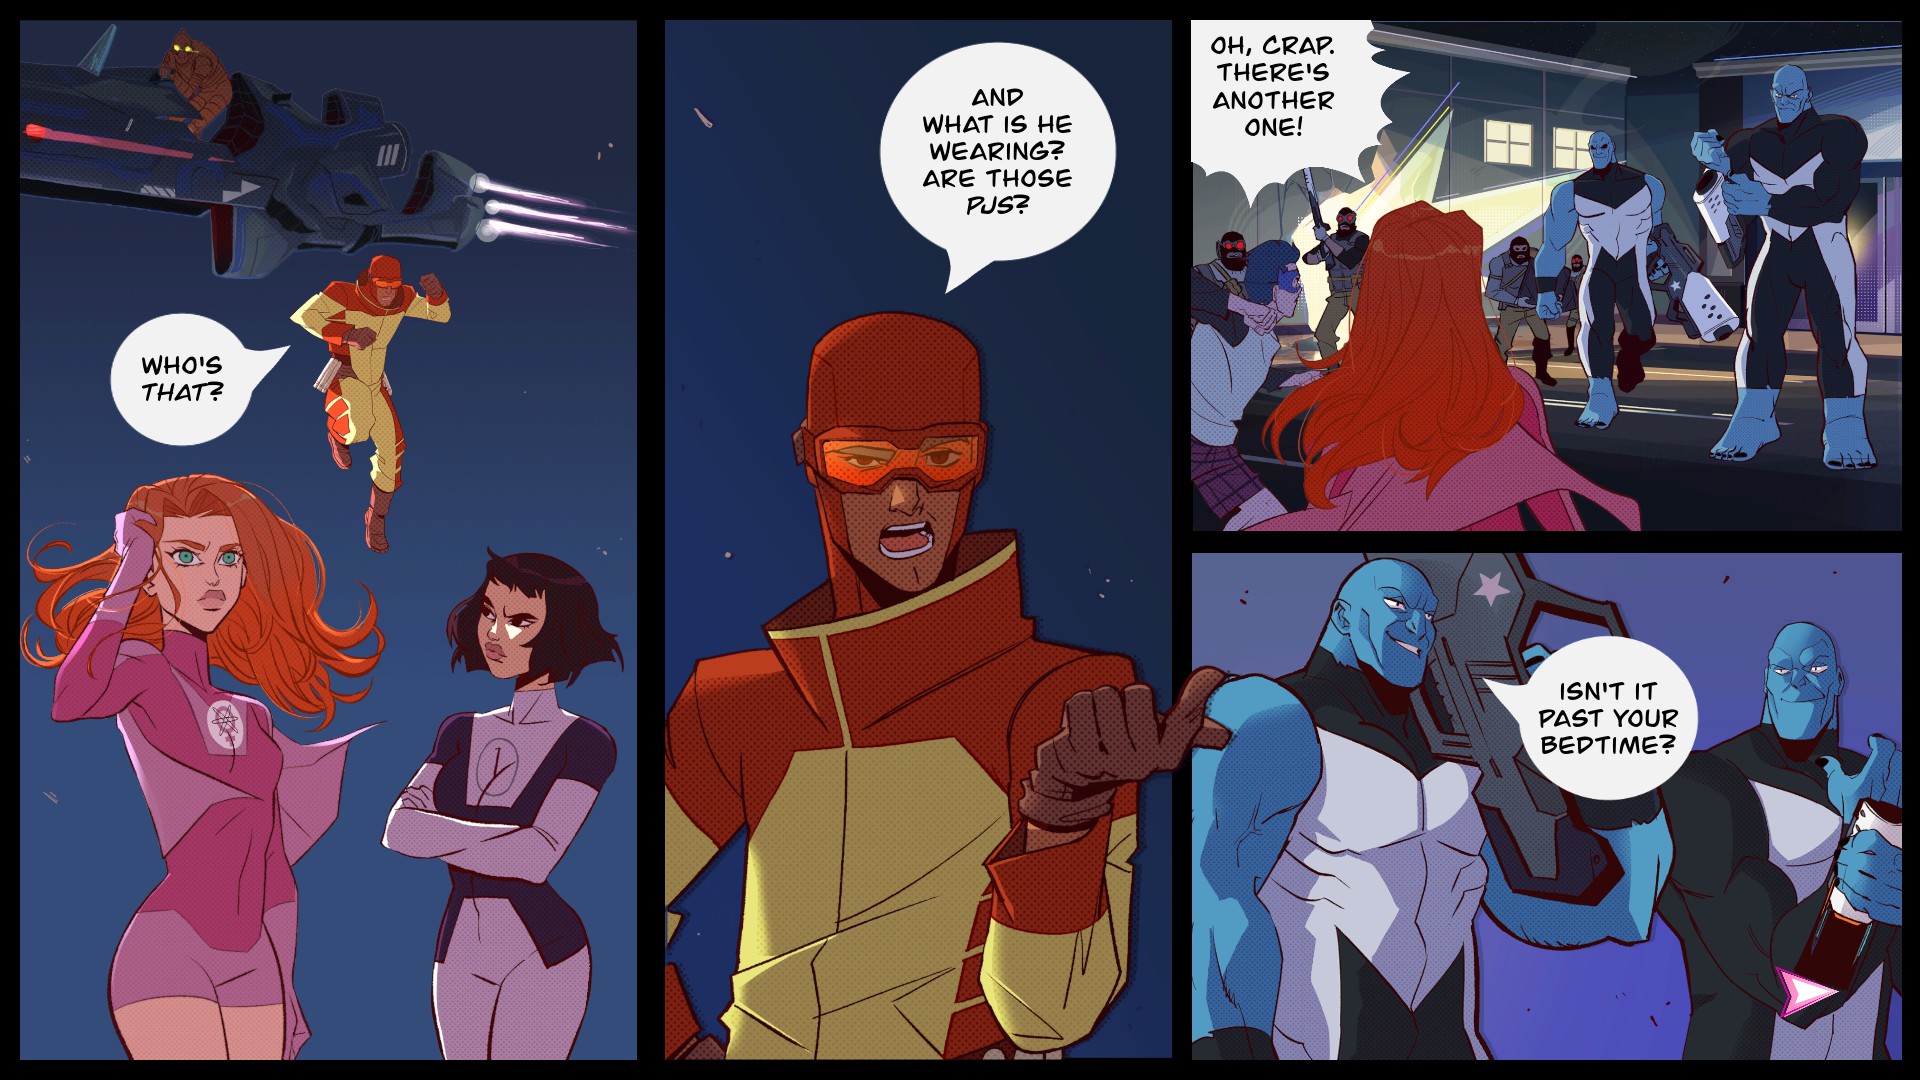 A screenshot from Invincible Presents: Atom Eve. It's presented in a comic book style. In the first two panels, a man wearing a yellow and red uniform says "Who is that? And what is he wearing? Are those PJs?" He is standing with two women, one in a pink uniform and the other in purple. The next panel shows two blue, buff villains and four others wearing masks; the man says "Oh crap. There's another one." The final panel has one of the blue guys saying "Isn't it past your bedtime?